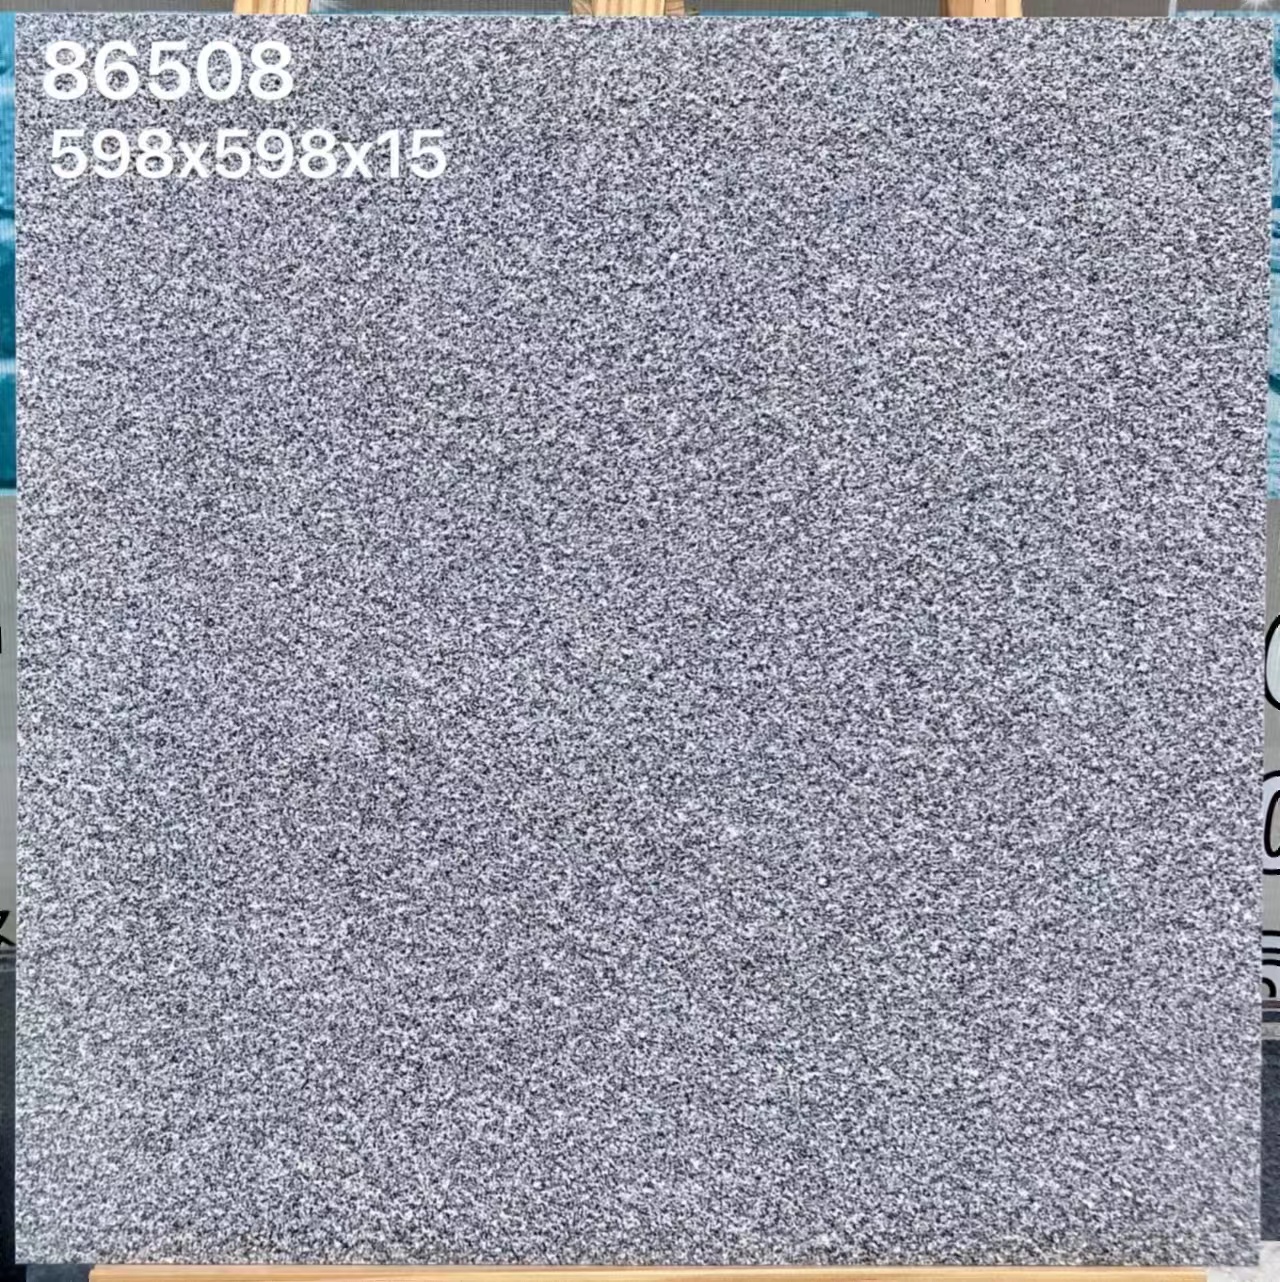 Versatile Square Ecological Paving Stone Series for Indoor and Outdoor Use